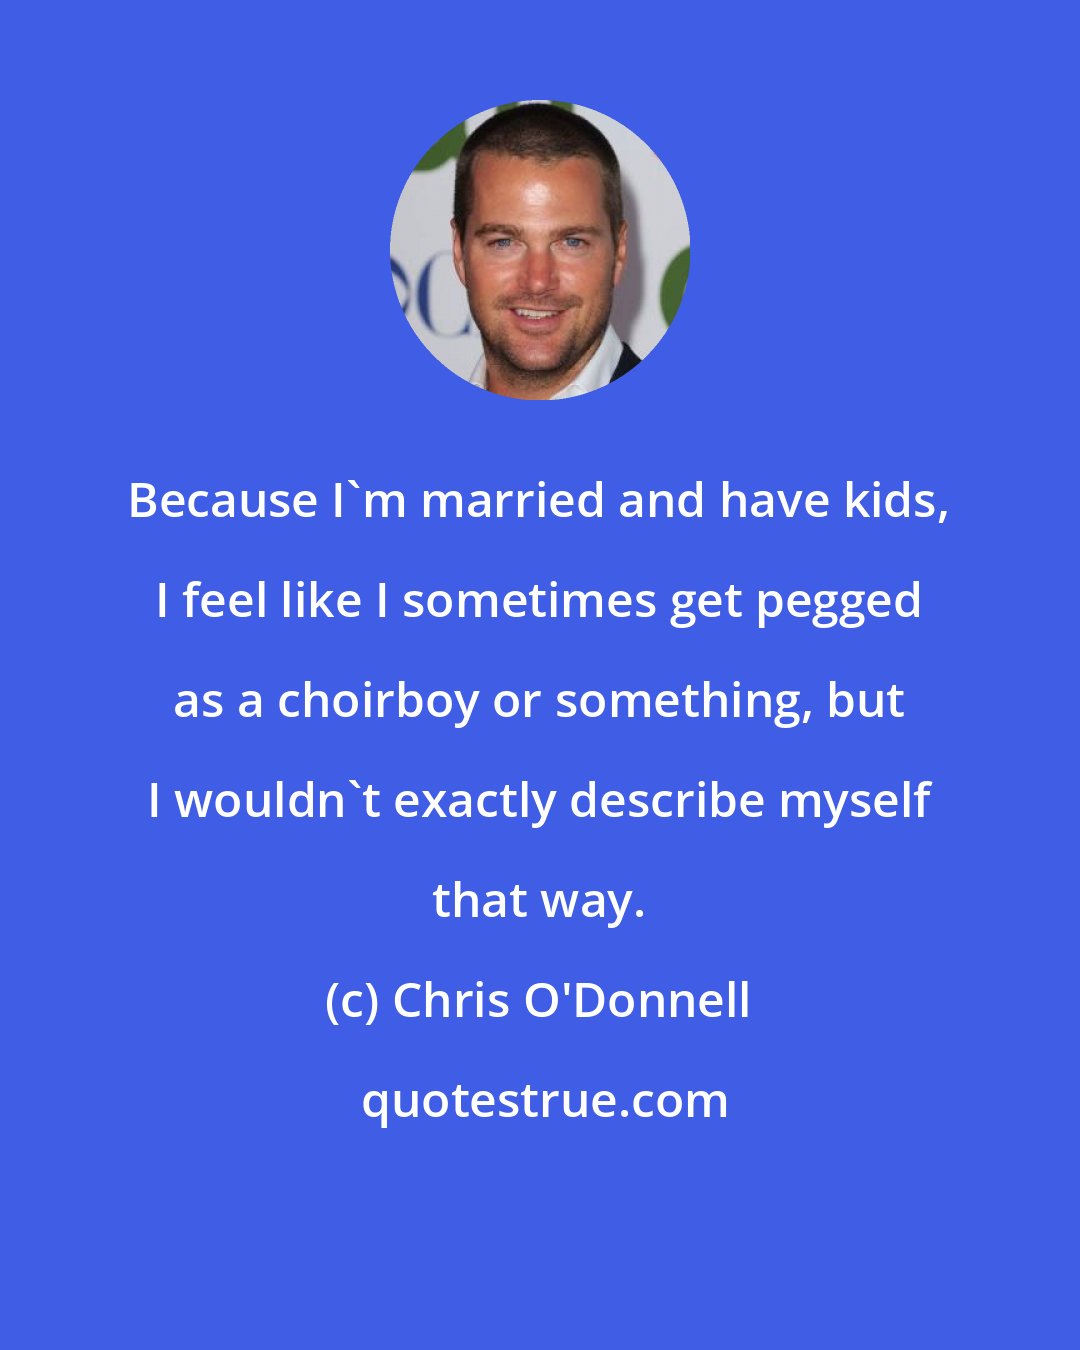 Chris O'Donnell: Because I'm married and have kids, I feel like I sometimes get pegged as a choirboy or something, but I wouldn't exactly describe myself that way.